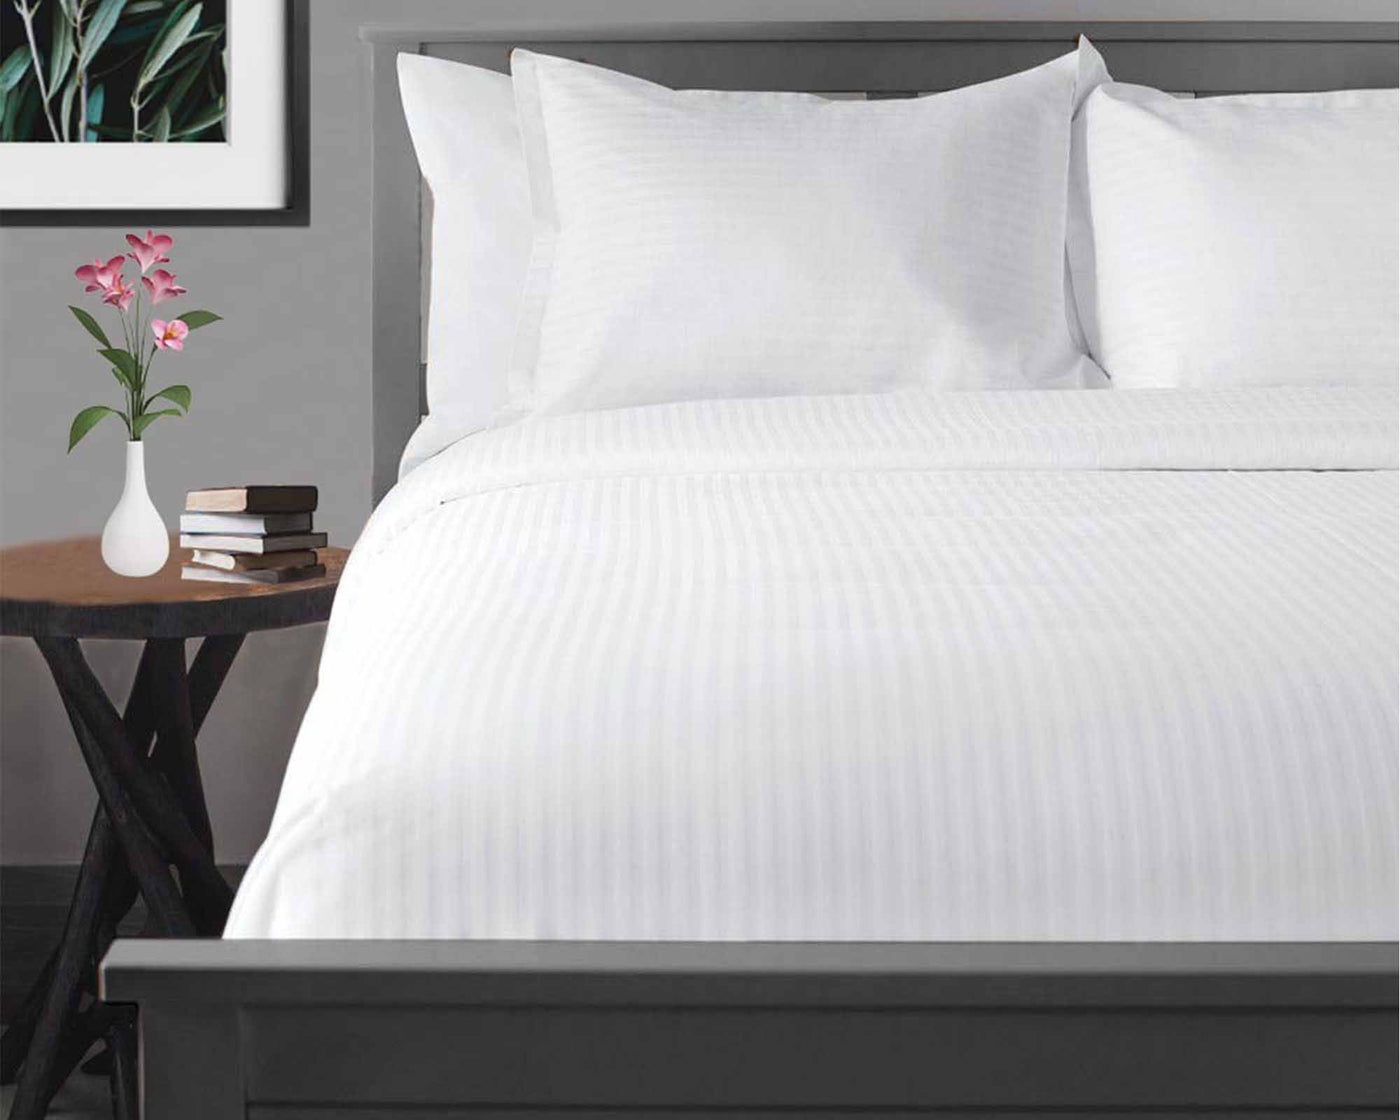 1/4 inch white tone on tone stripe flat sheet on the bed with luxury pillows 